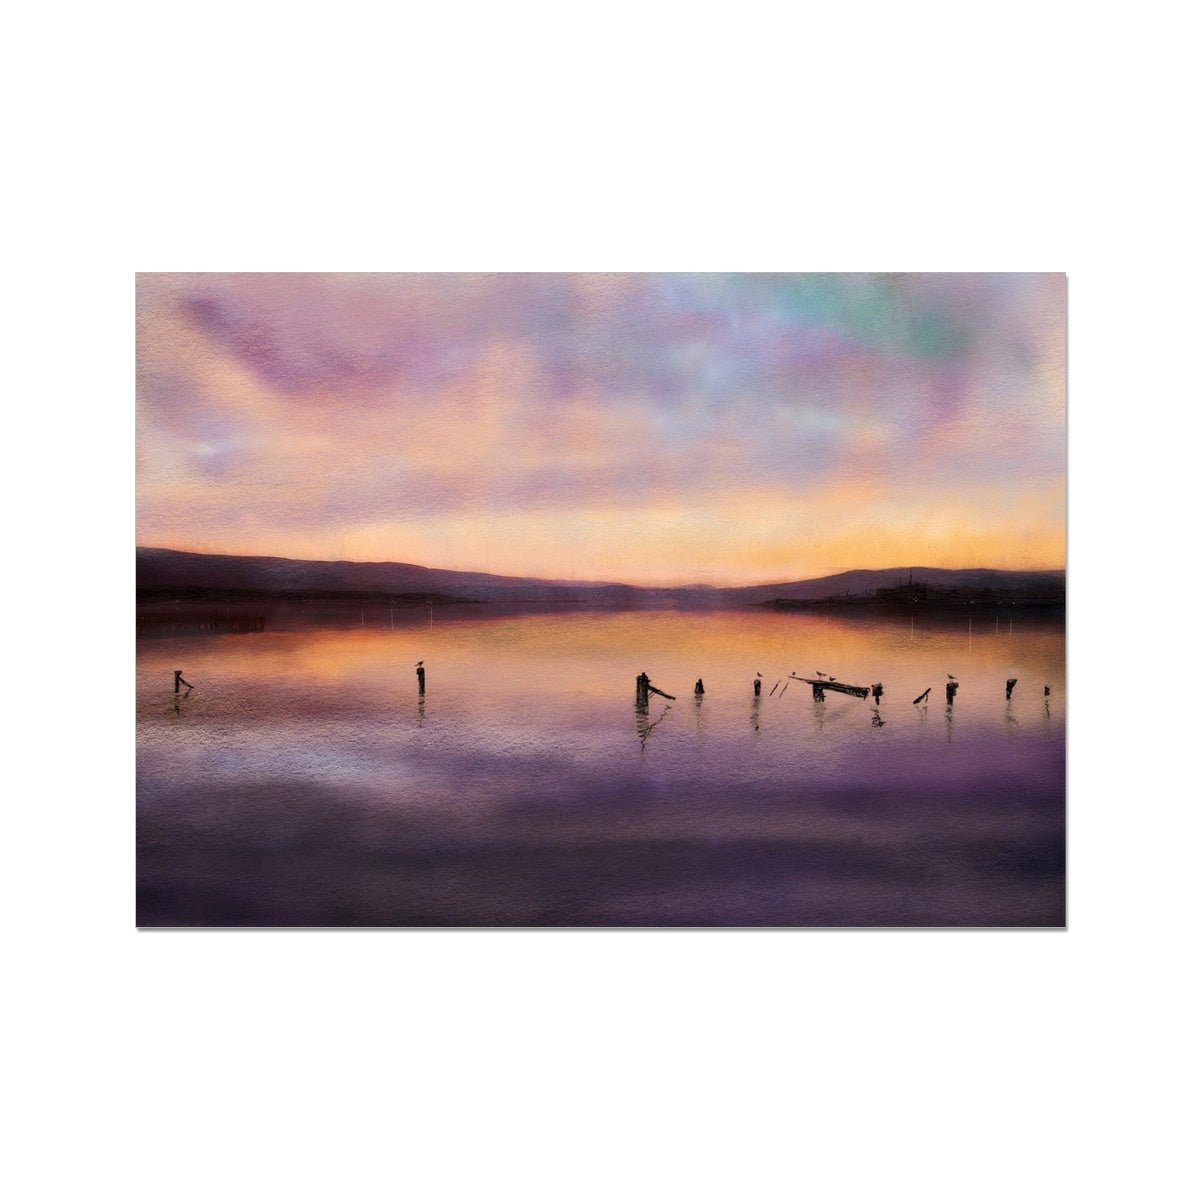 Admiralty Jetty Dusk Painting | Fine Art Prints From Scotland-Unframed Prints-River Clyde Art Gallery-A2 Landscape-Paintings, Prints, Homeware, Art Gifts From Scotland By Scottish Artist Kevin Hunter